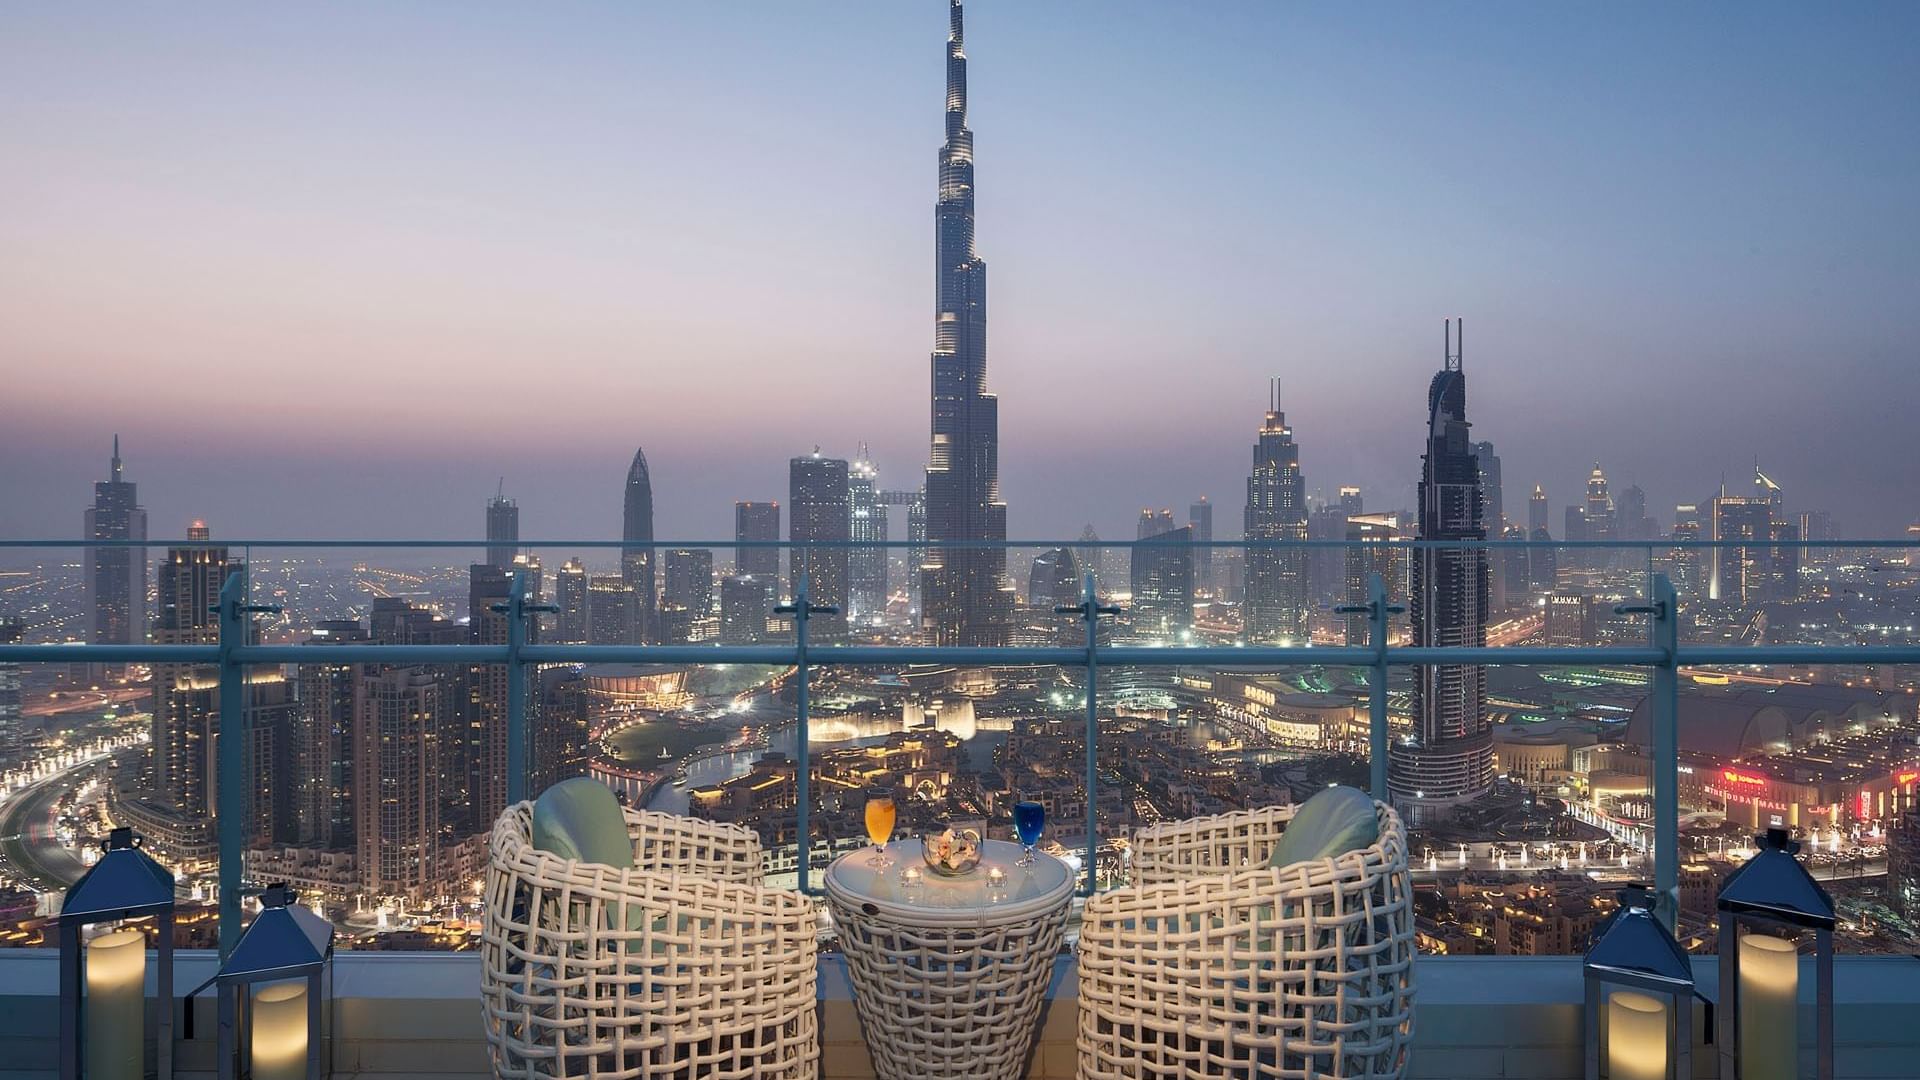 Night view of a balcony with wicker chairs overlooking the Burj Khalifa from Penthouse View at DAMAC Maison Distinction